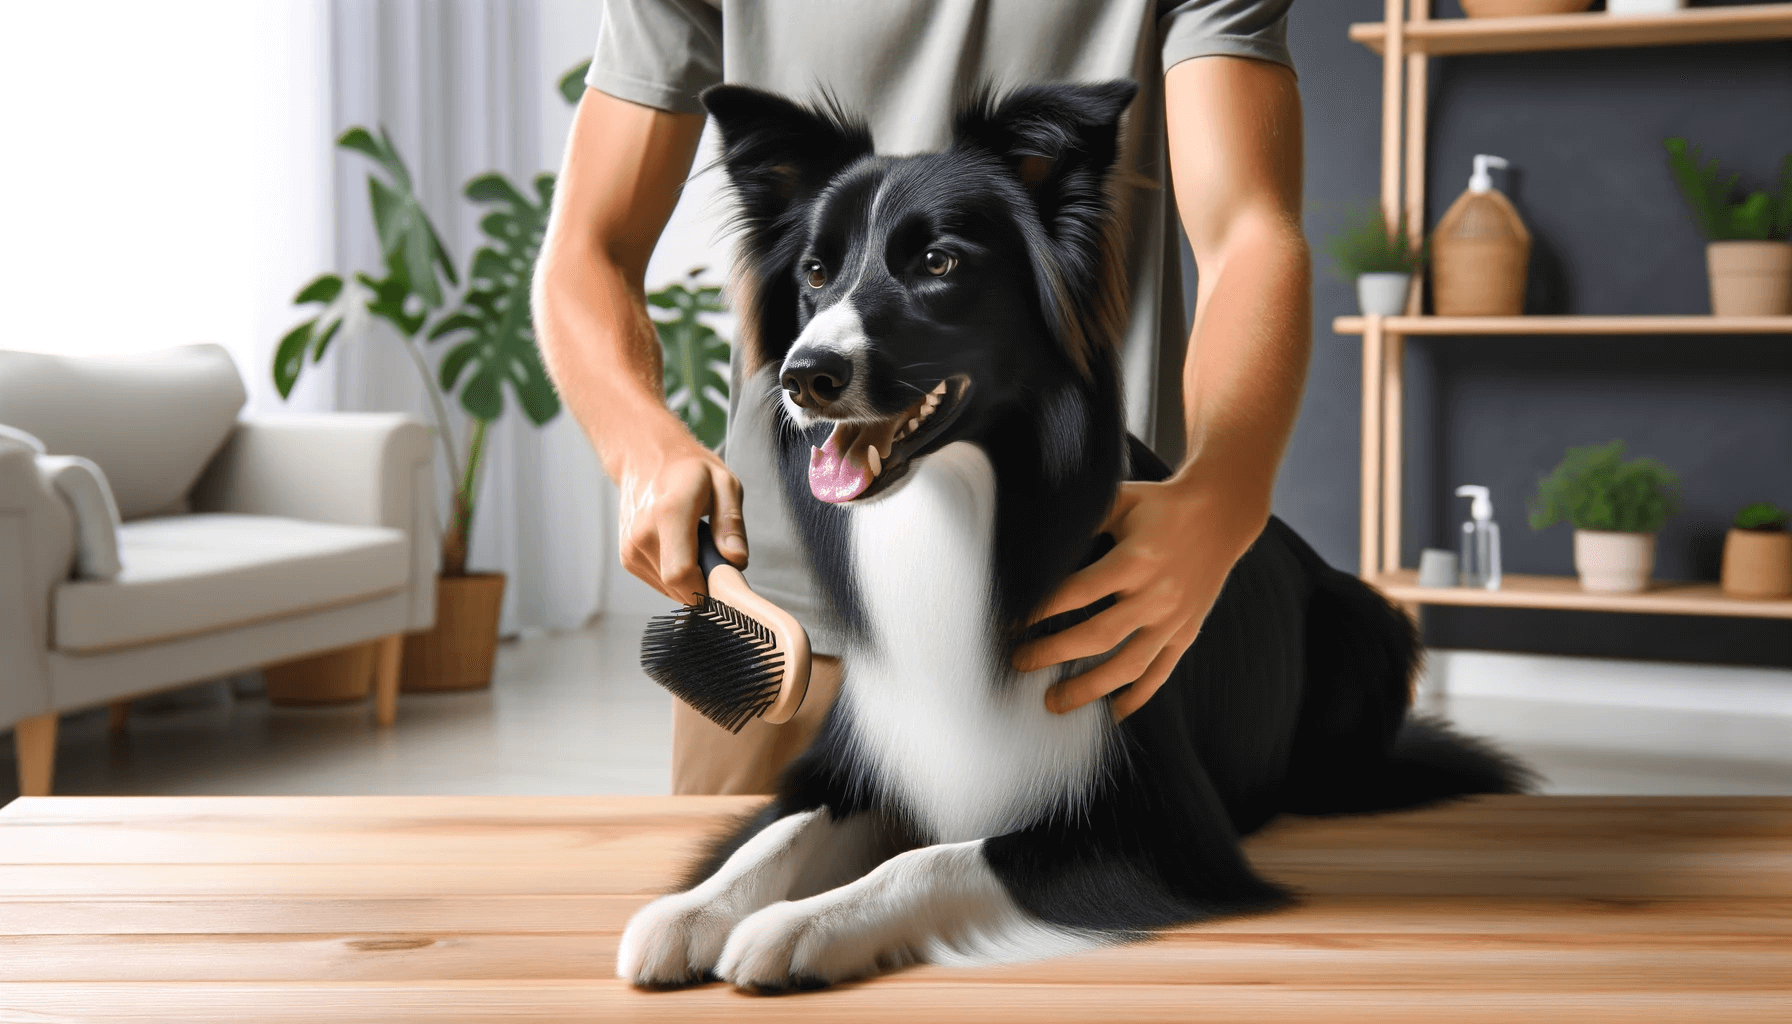 Smooth Coat Border Collie being groomed by its owner in a home environment.